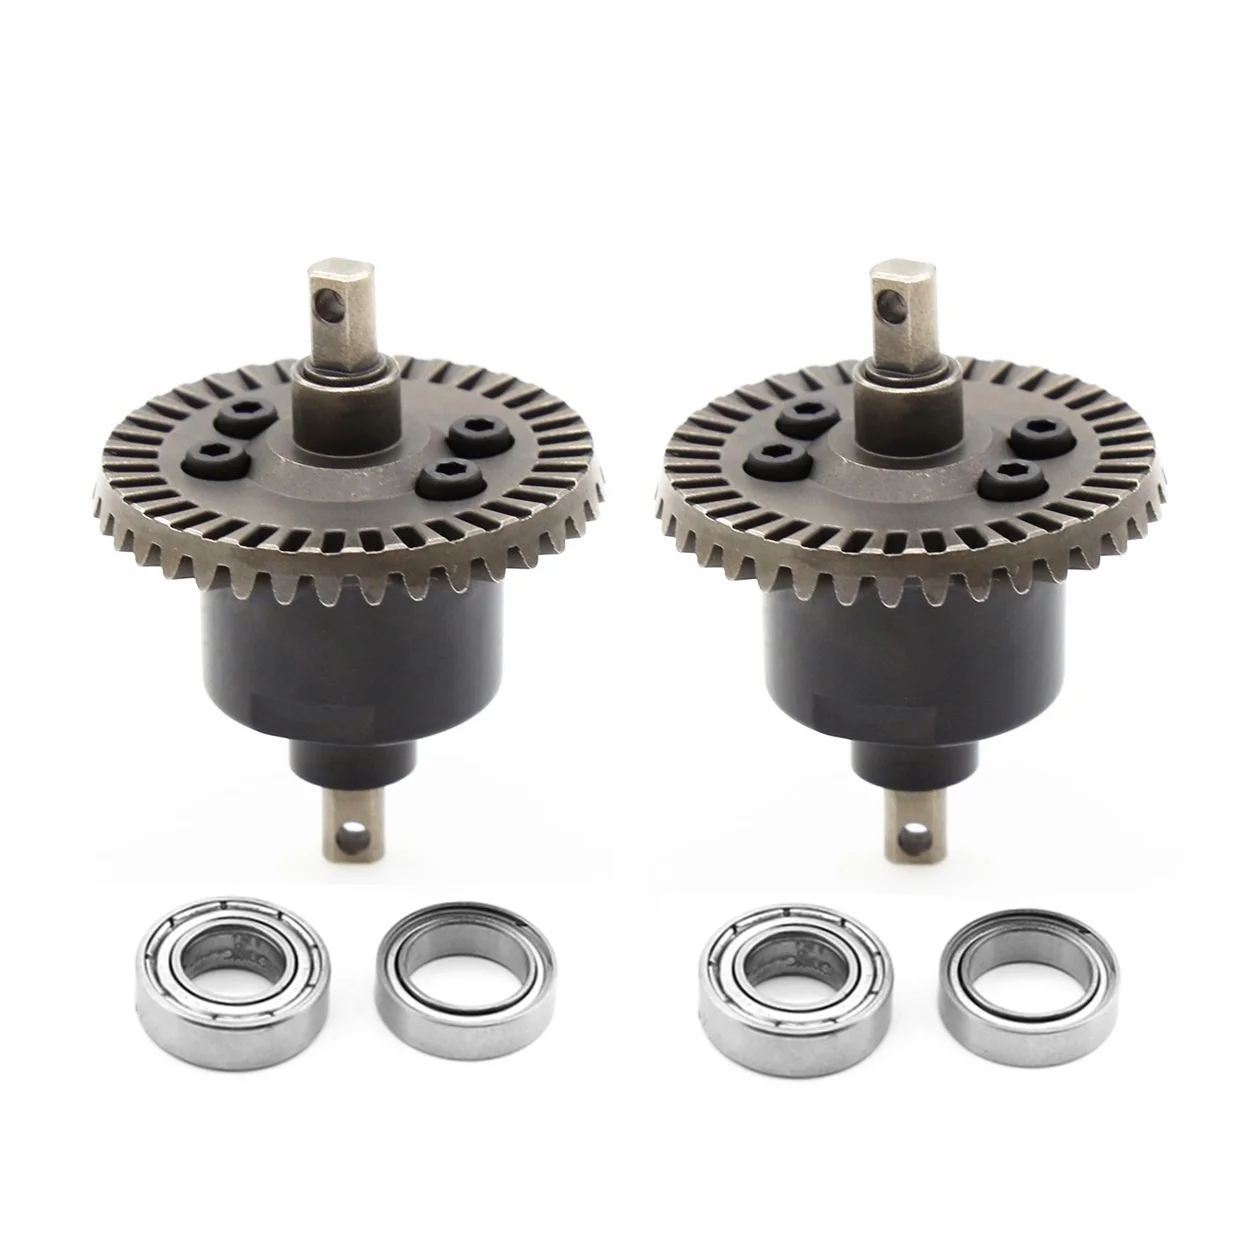 

2pcs Front and Rear Differential with Bearing for Traxxas Slash 4x4 VXL Stampede Rustler Remo HQ727 1/10 RC Car Upgrade Parts